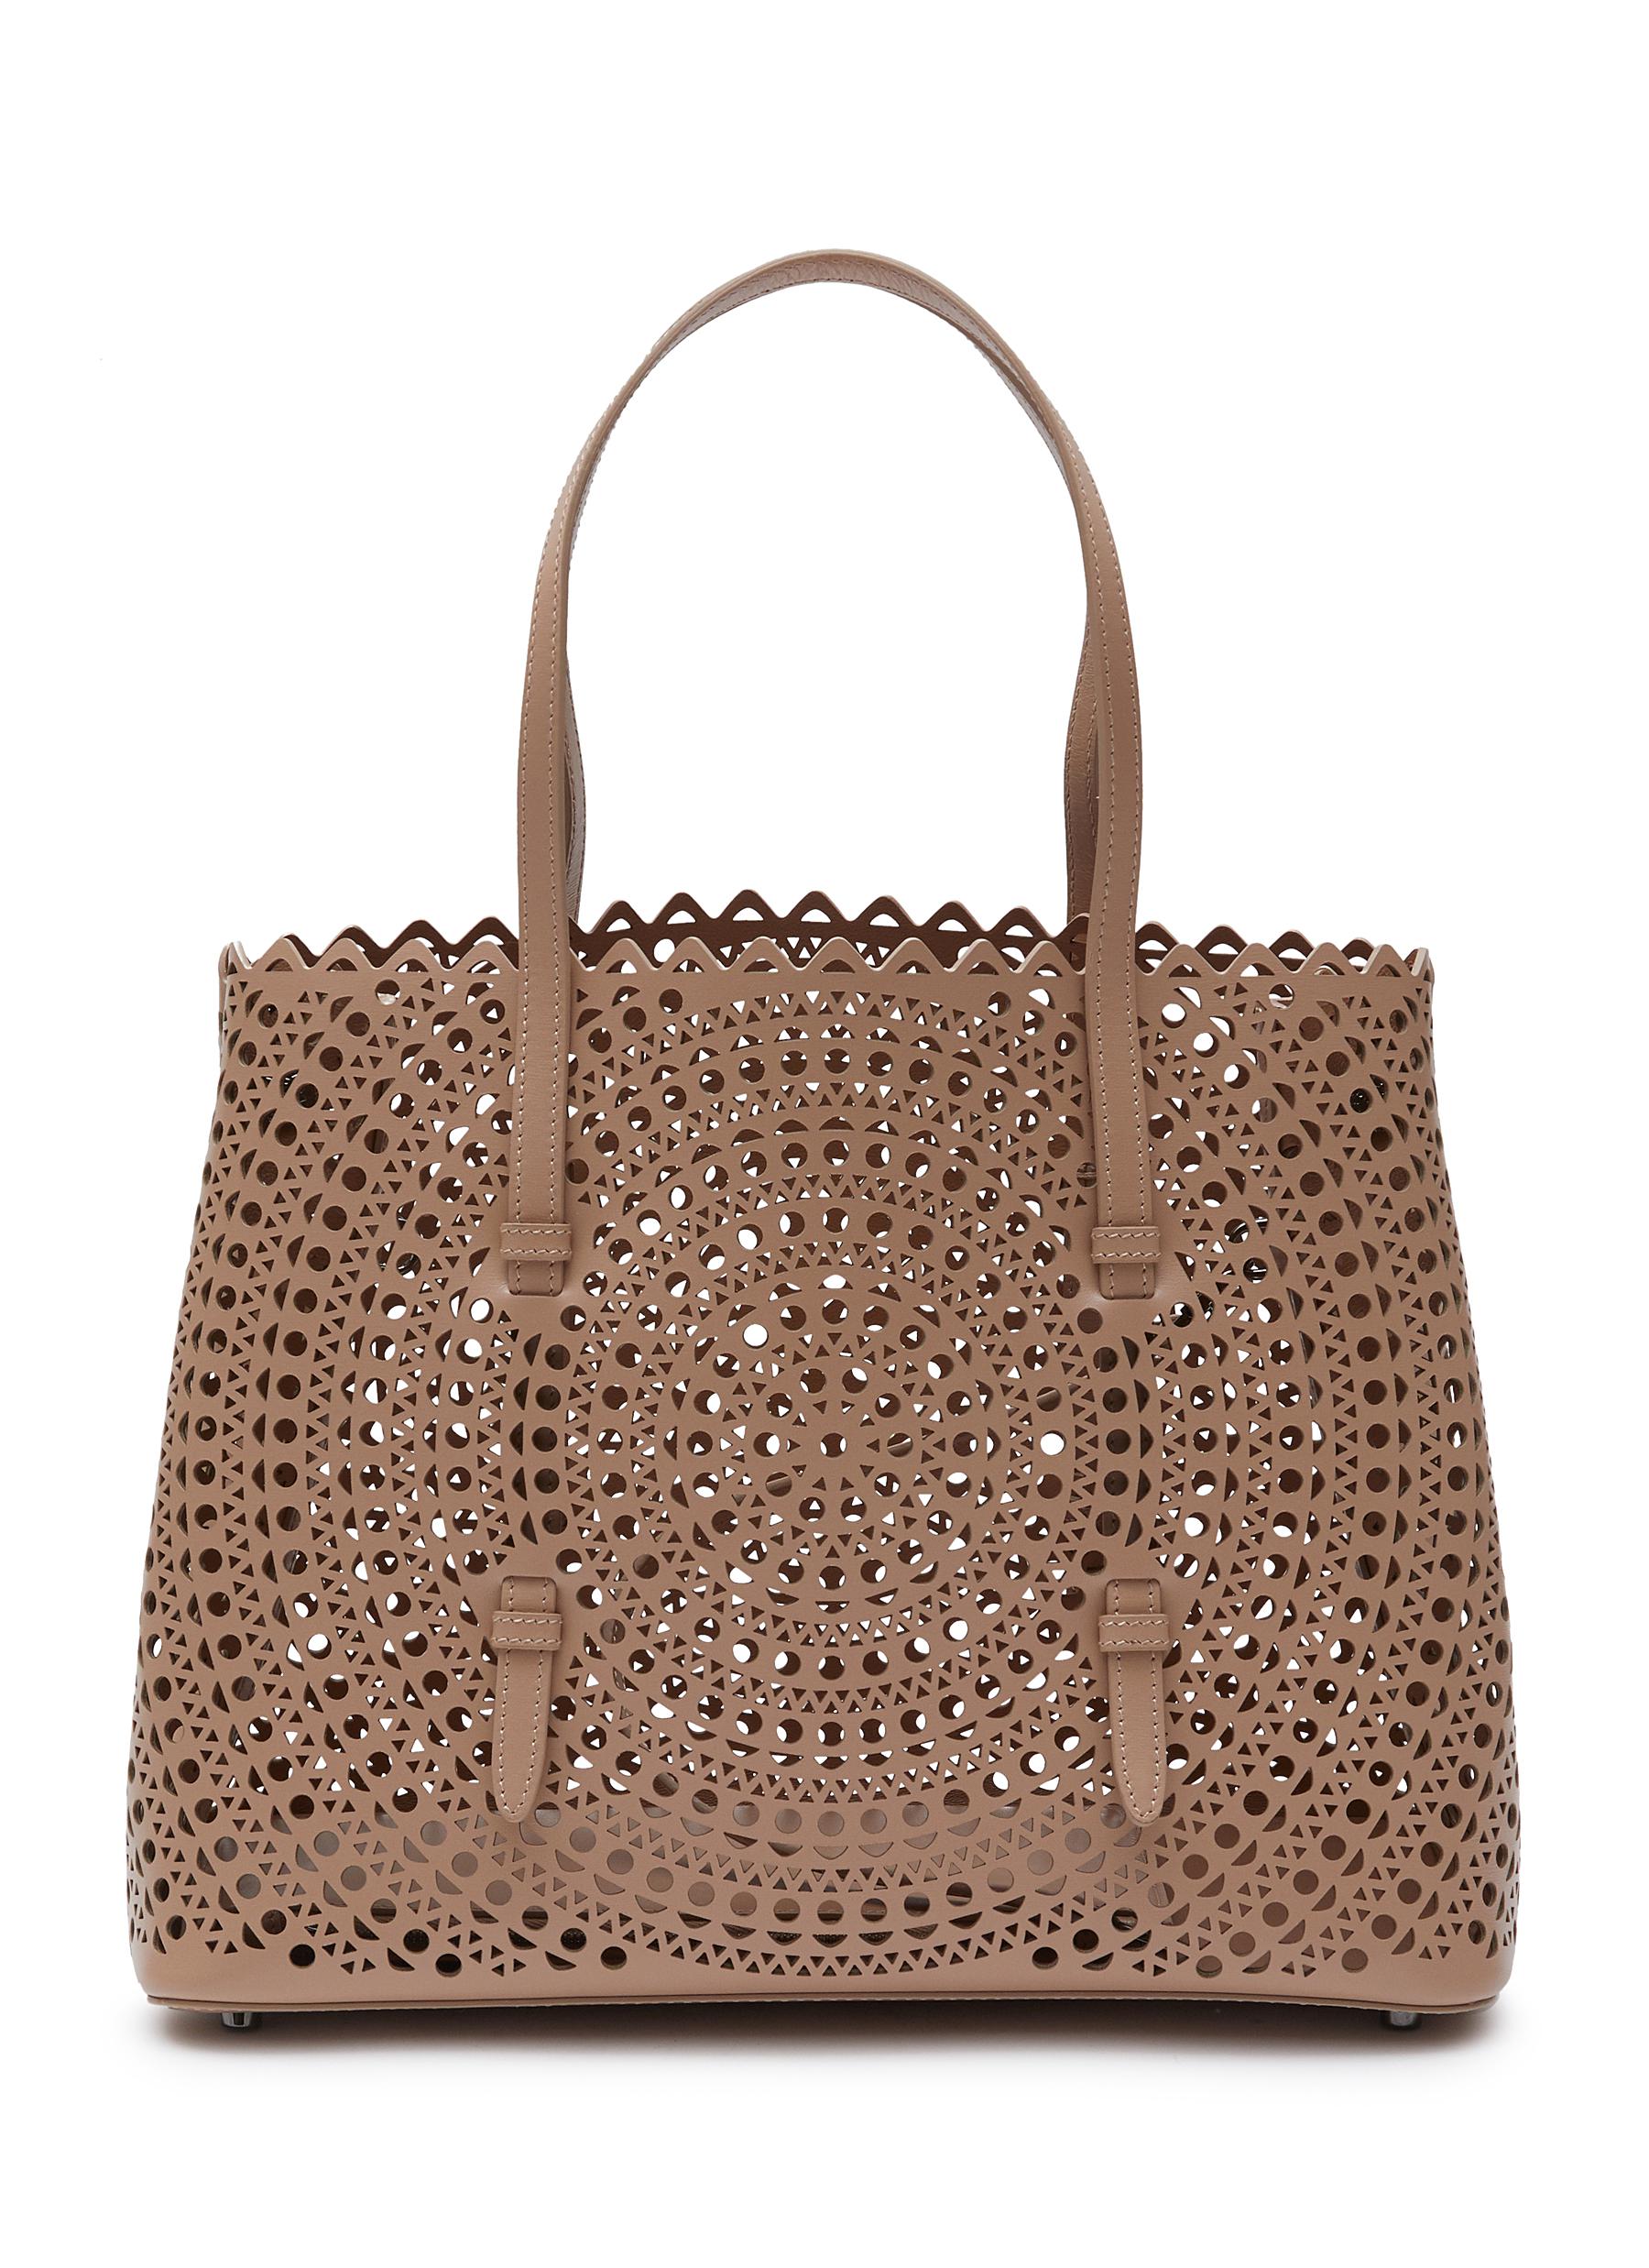 'MINA' 32 VIENNE PERFORATED CALFSKIN LEATHER TOTE BAG